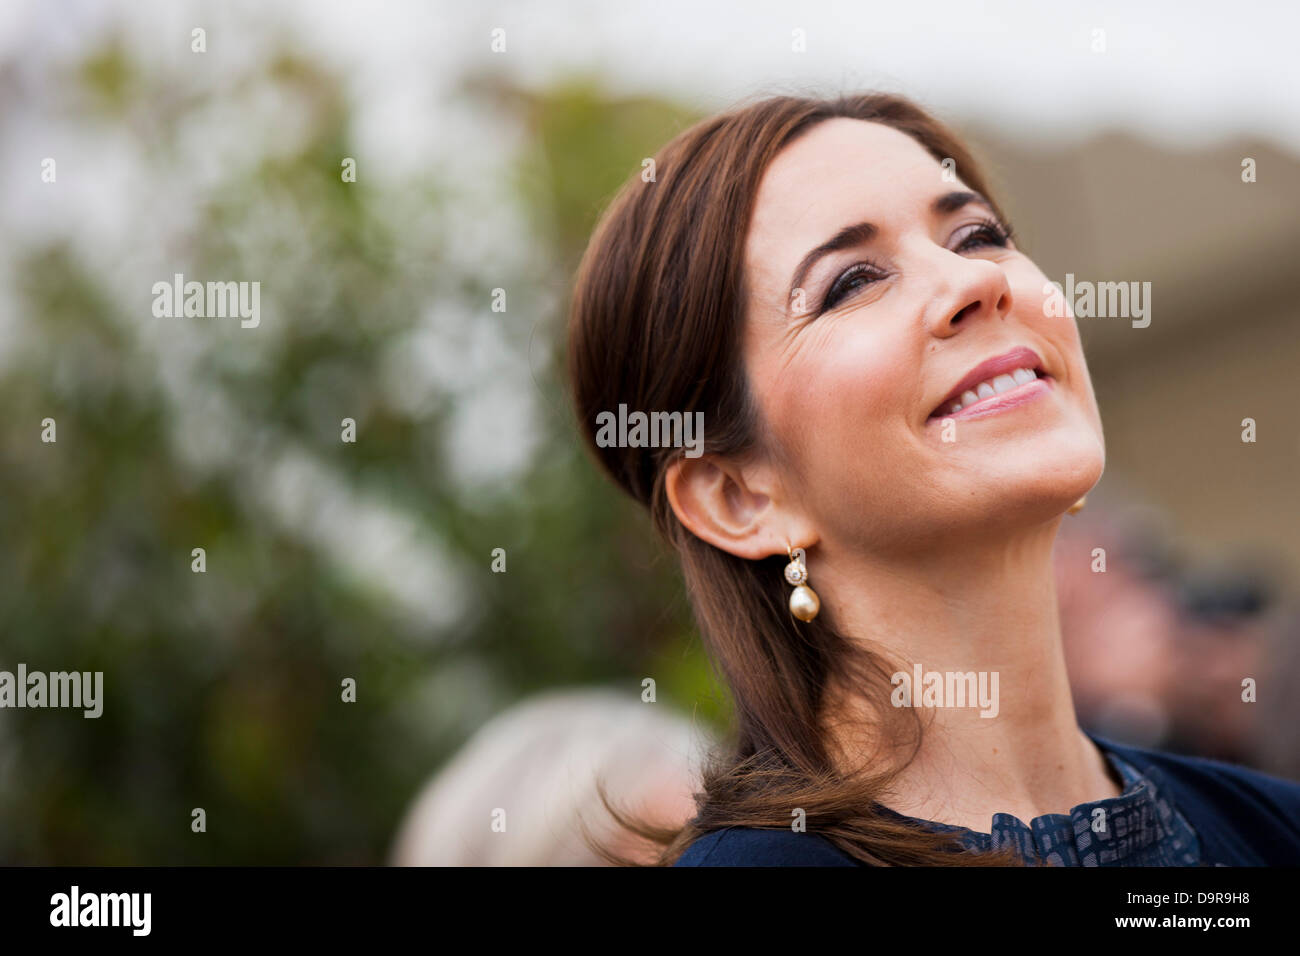 Portrait of HRH Crown Princess Mary of Denmark, National Portrait Gallery